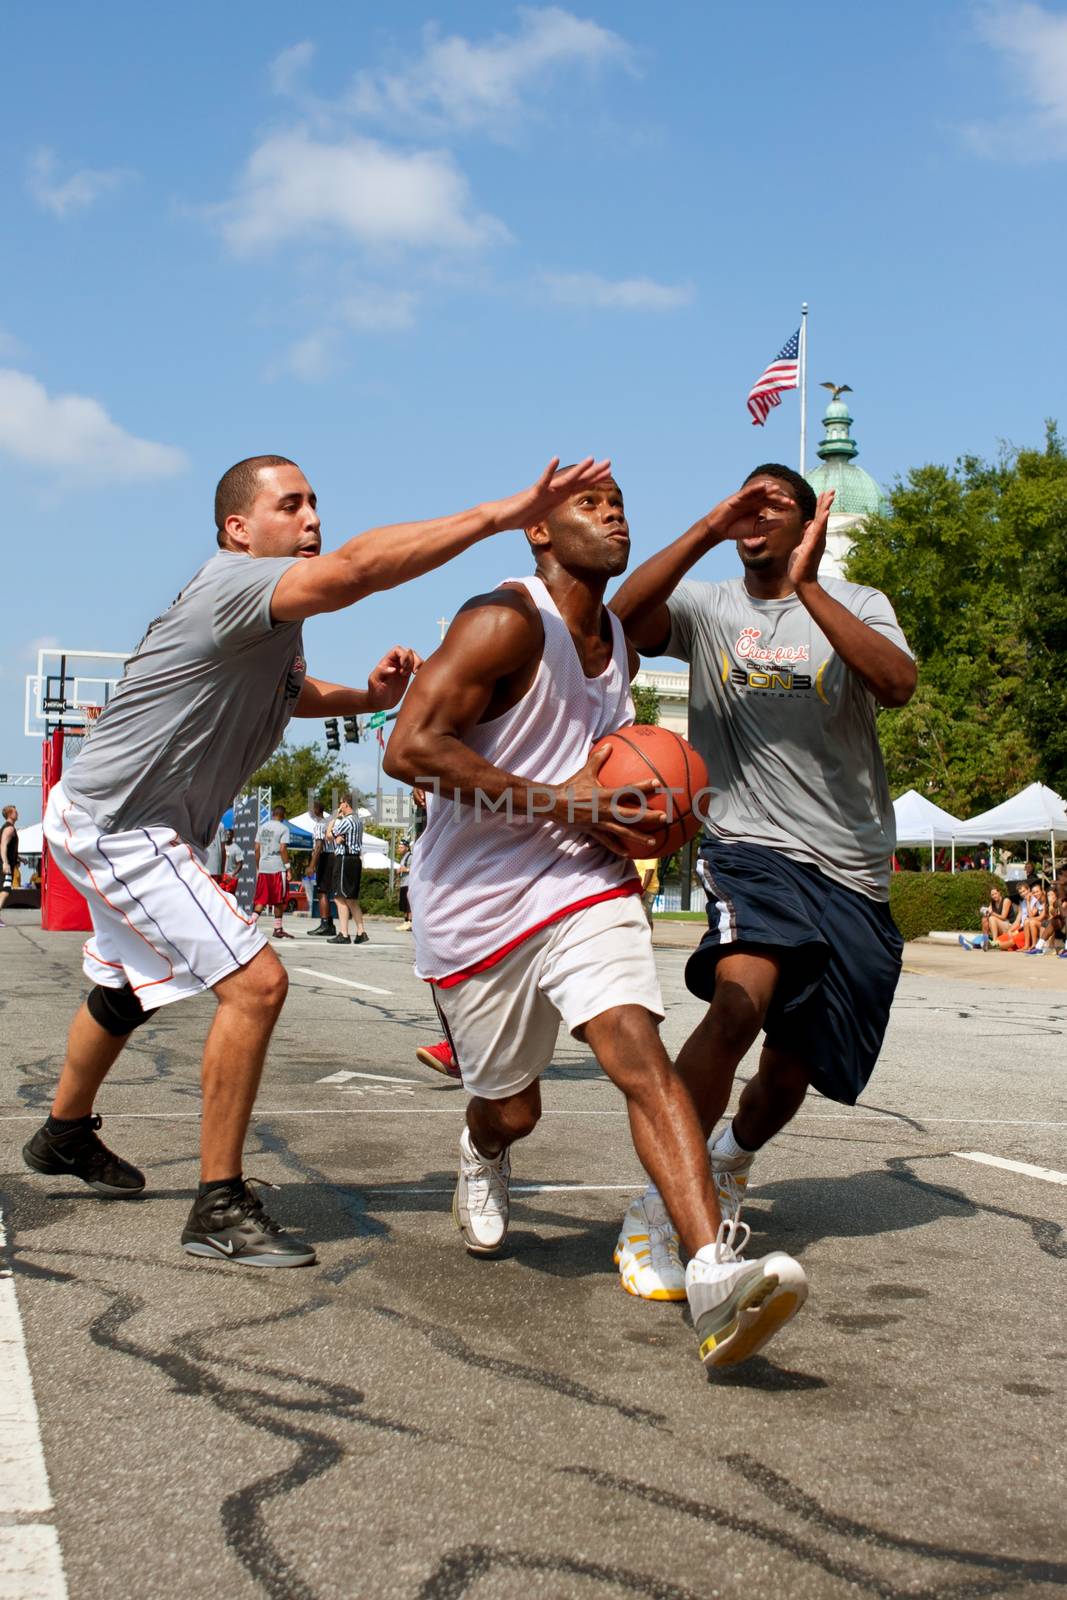 Athens, GA, USA - August 24, 2013:  A young man splits two defenders while driving to the hoop in a 3-on-3 basketball tournament held on the streets of downtown Athens.